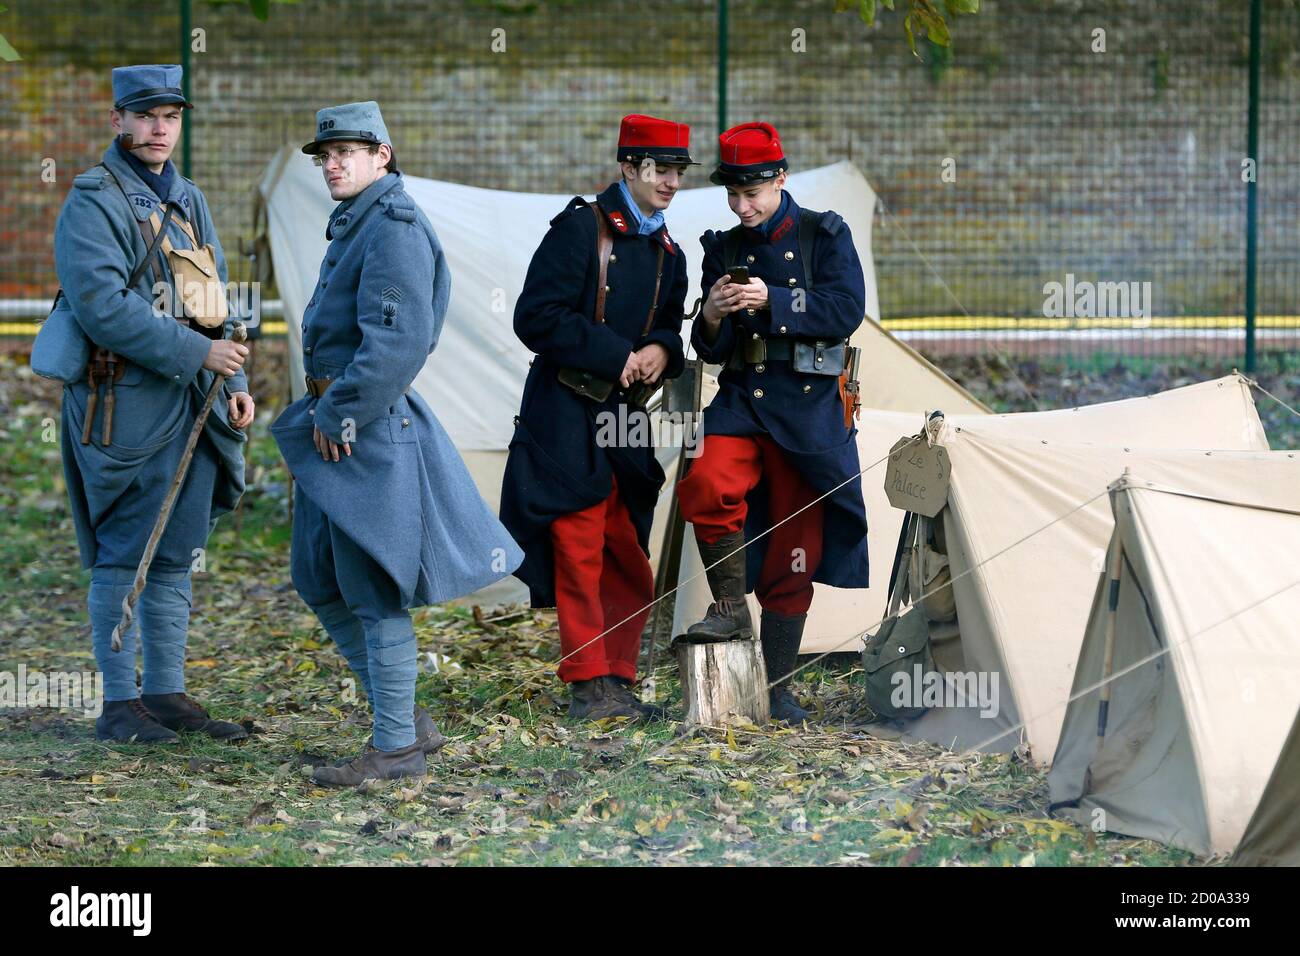 Thomas and Brice (R) check a mobile phone next to Guillaume (L) and Andy, dressed with vintage army uniforms as Poilu (French soldier in World War I) at a bivouac camp of World War One Historical Association '14-18 en Somme' in Fouilloy, Northern France, November 10, 2013. The historical association '14-18 en Somme' was created in August 2009 by French history teacher Sylvain Pinard with the aim of keeping alive the memory of the soldiers of World War One, and promoting understanding of the battles of the Great War. Armed with their motto 'Never forget, always remember', the 30 members live, e Stock Photo